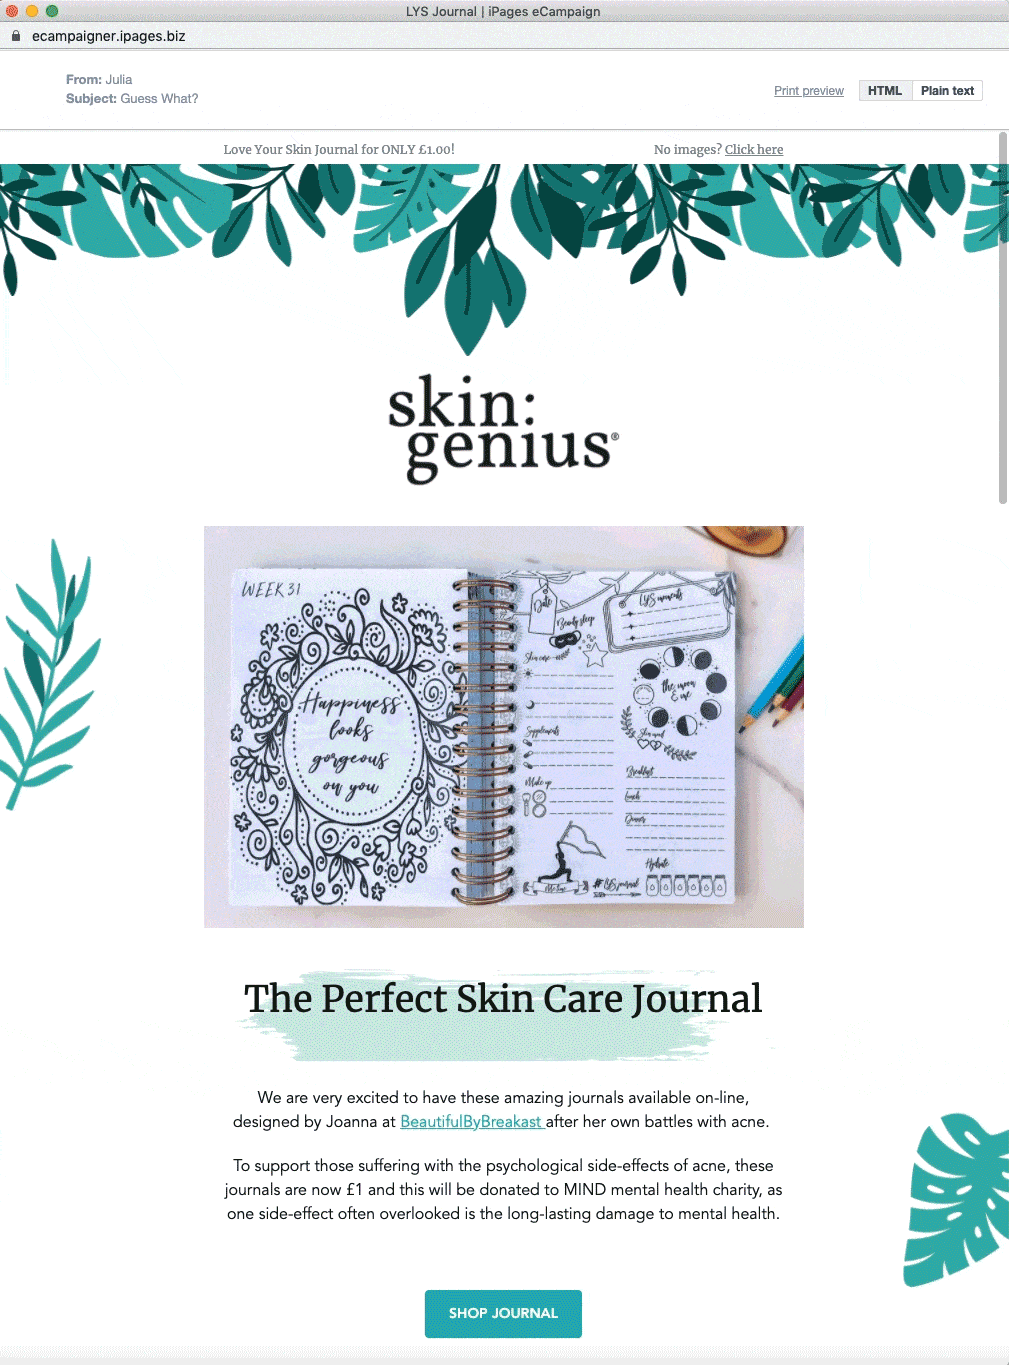 Animated image of email campaign design for Skin Genius